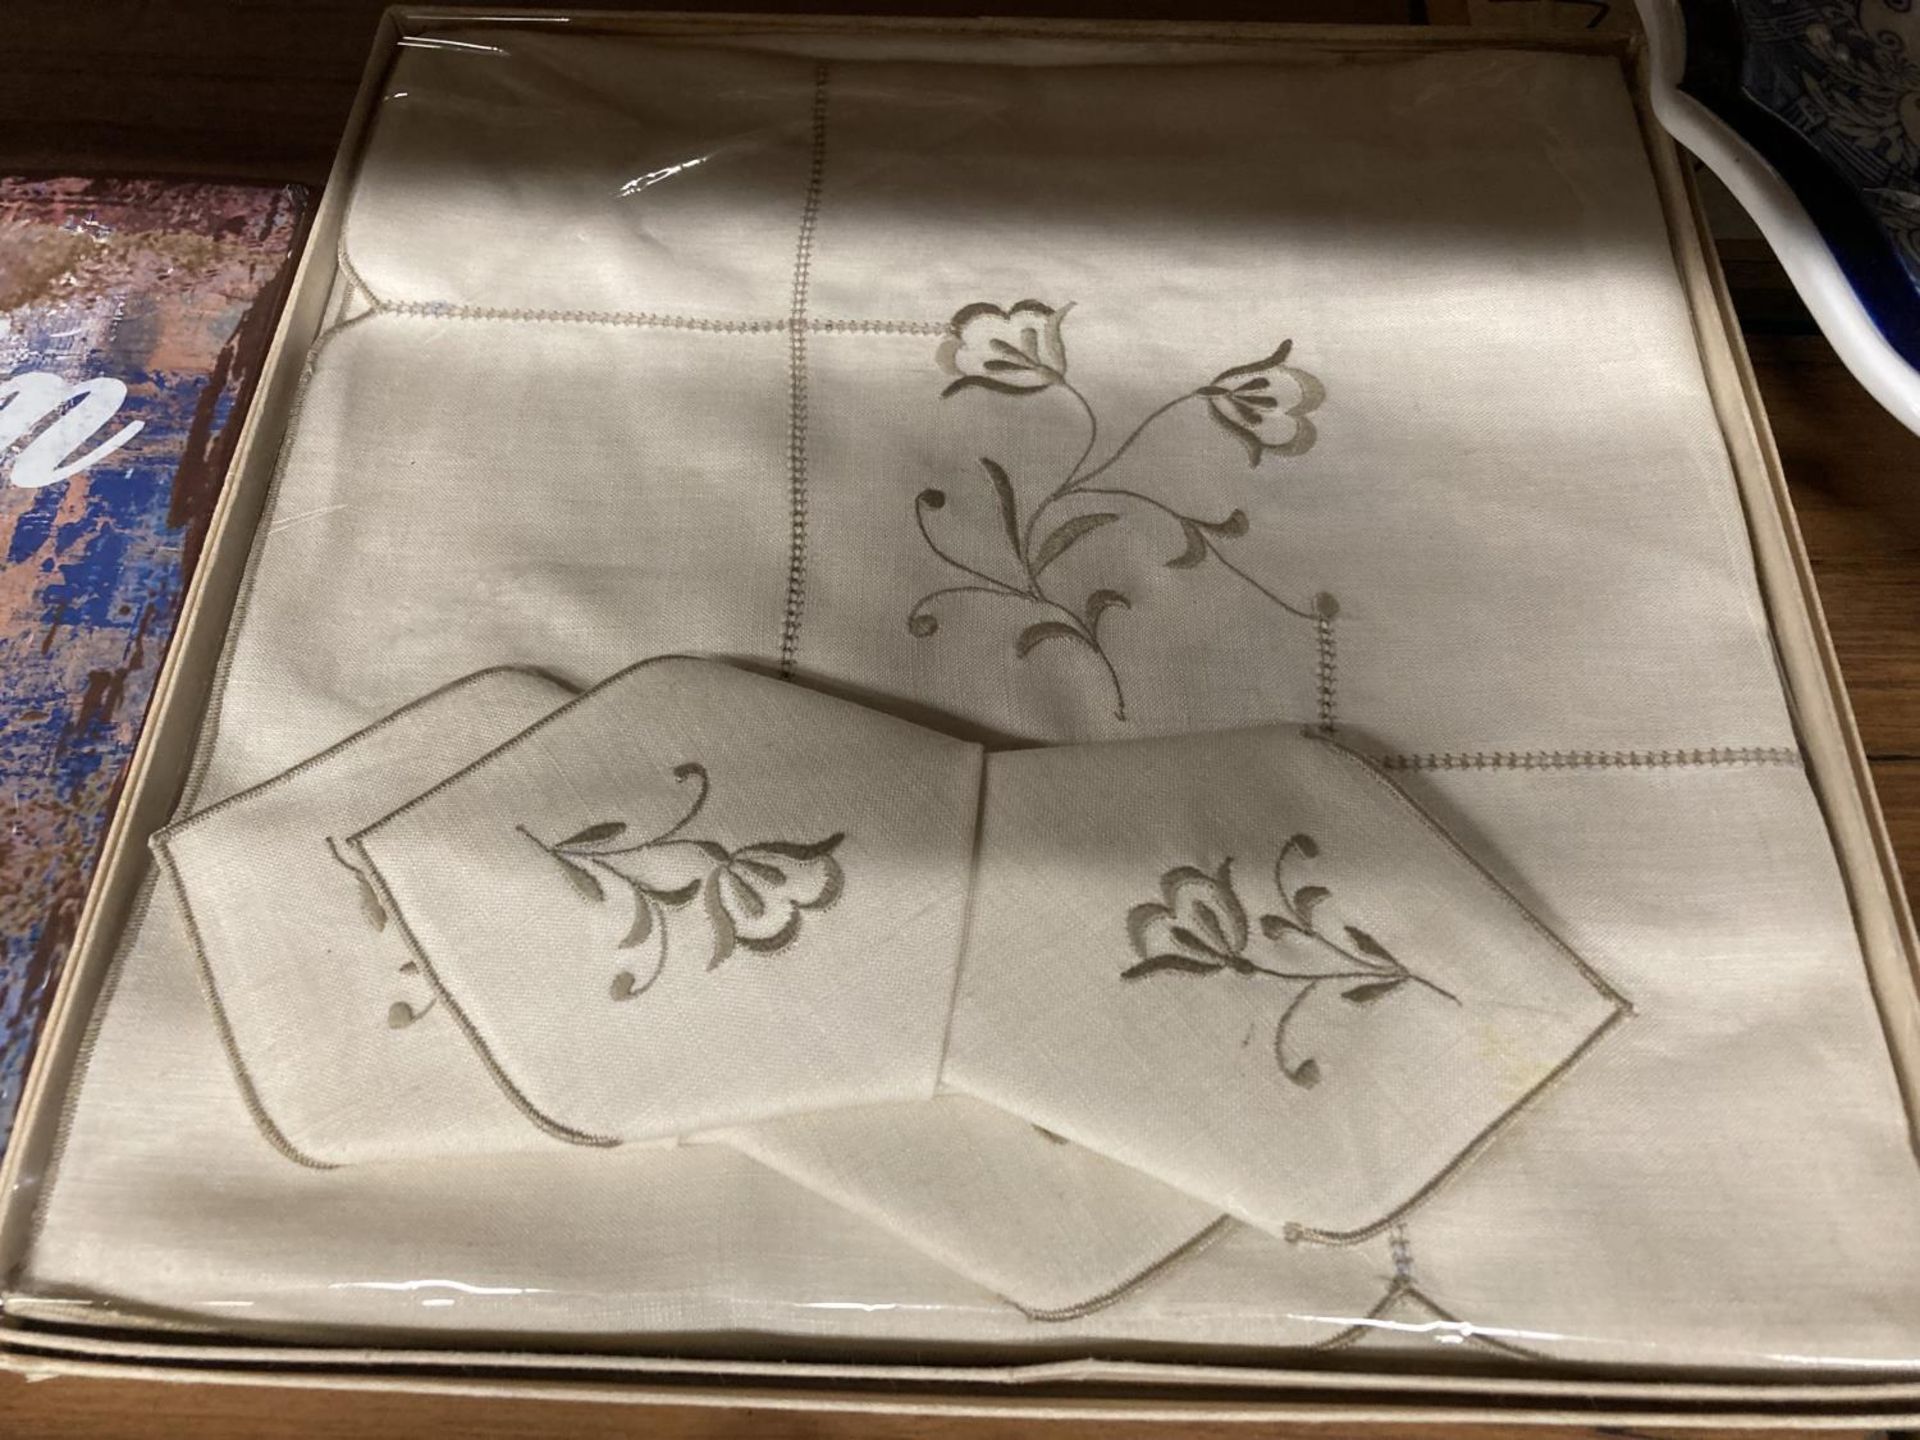 A QUANTITY OF FLATWARE AND A BOXED VINTAGE NAPKIN SET - Image 2 of 3